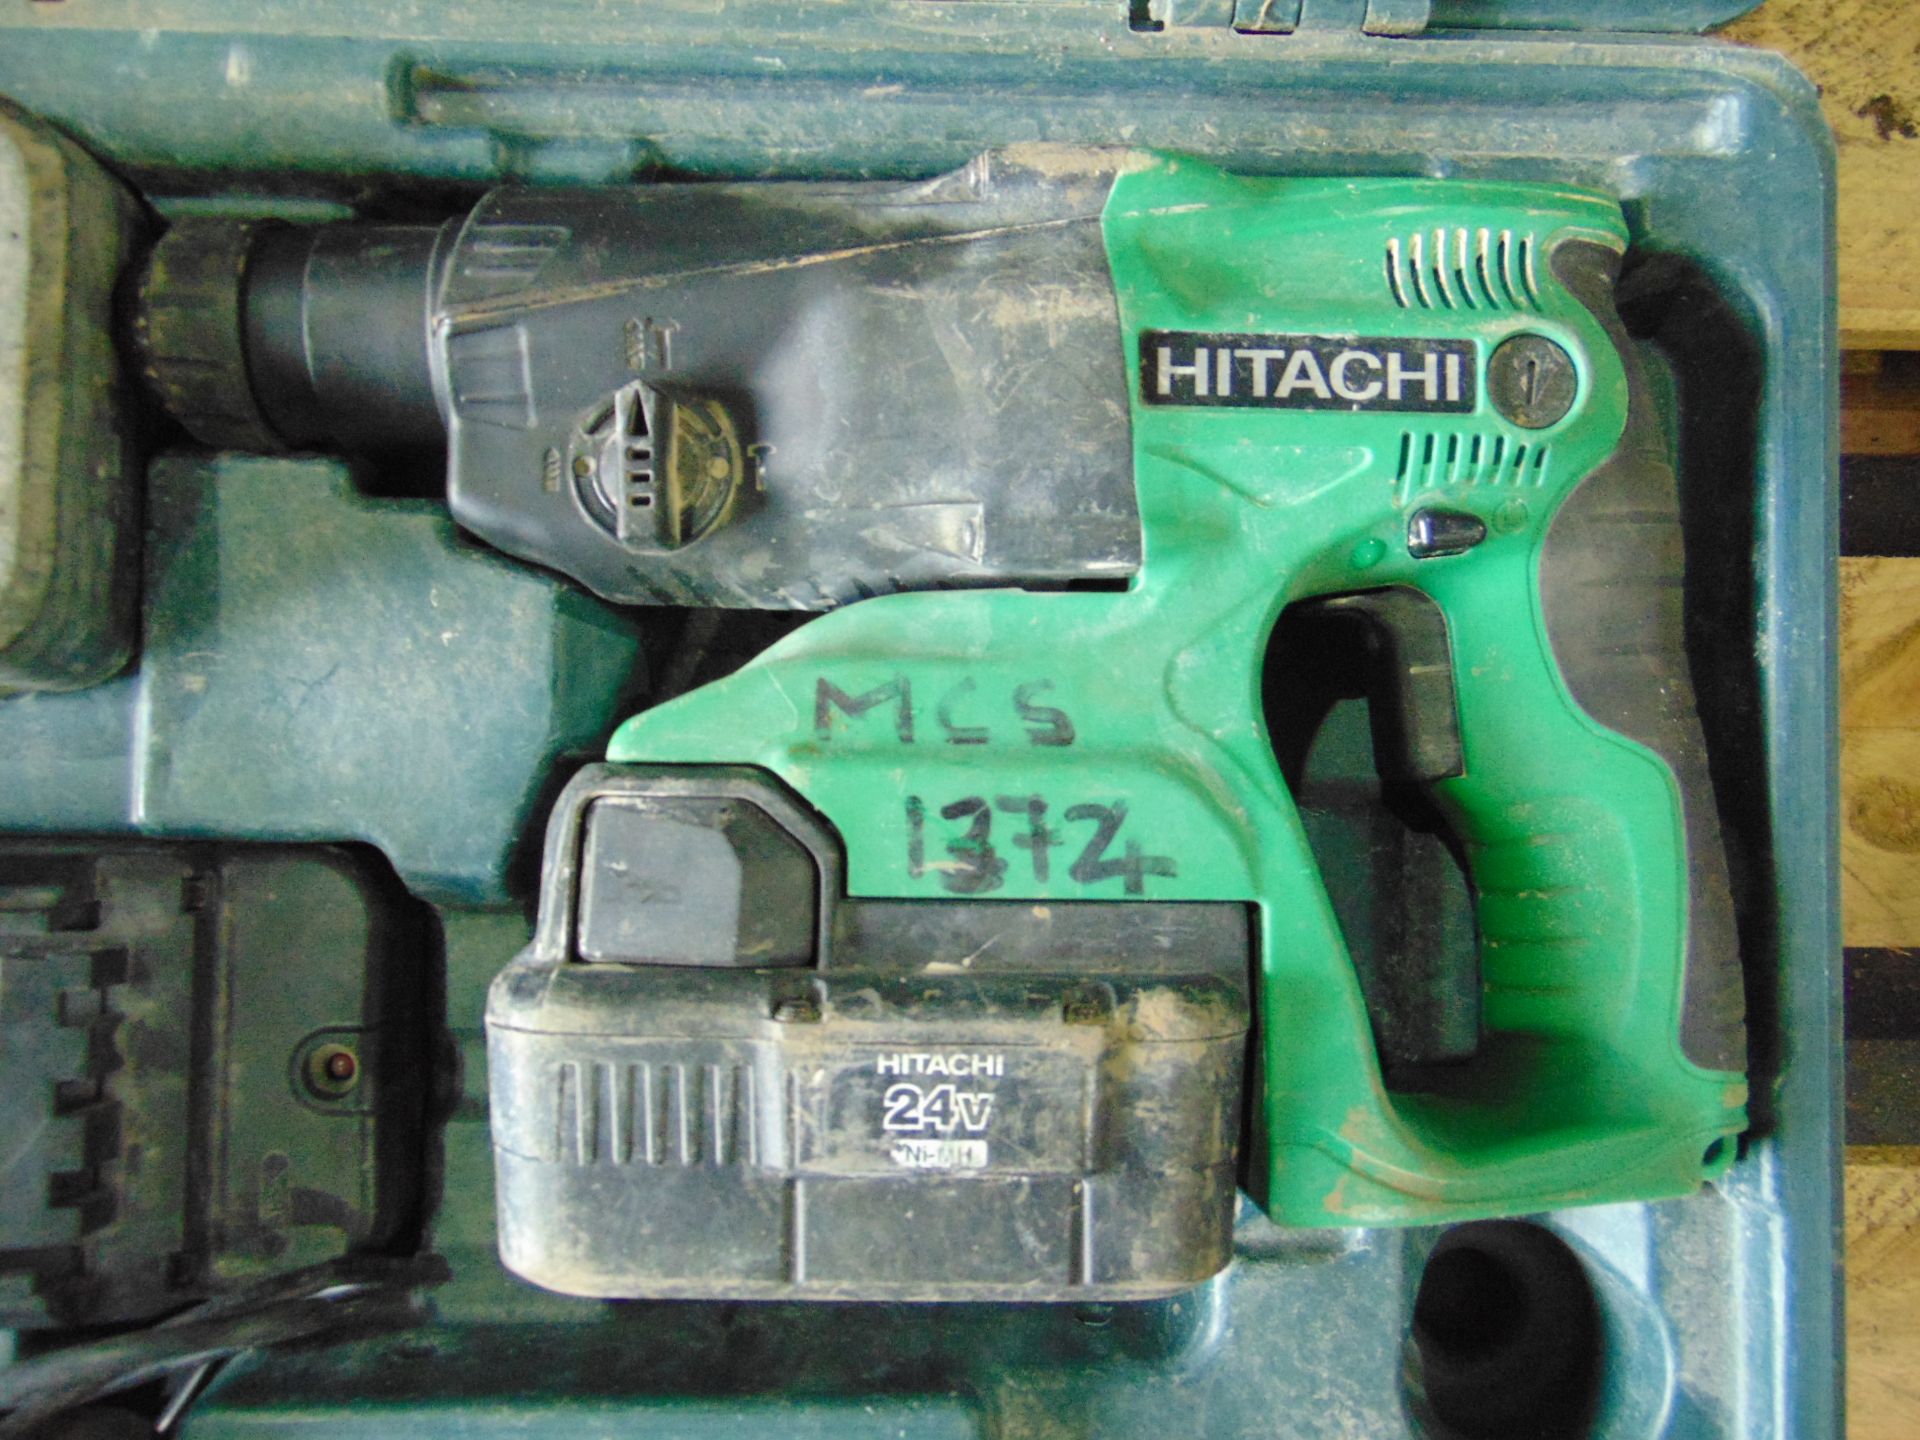 Hitachi DH24DVC SDS Hammer Drill c/w 2 x Batteries & Charger - Image 2 of 6